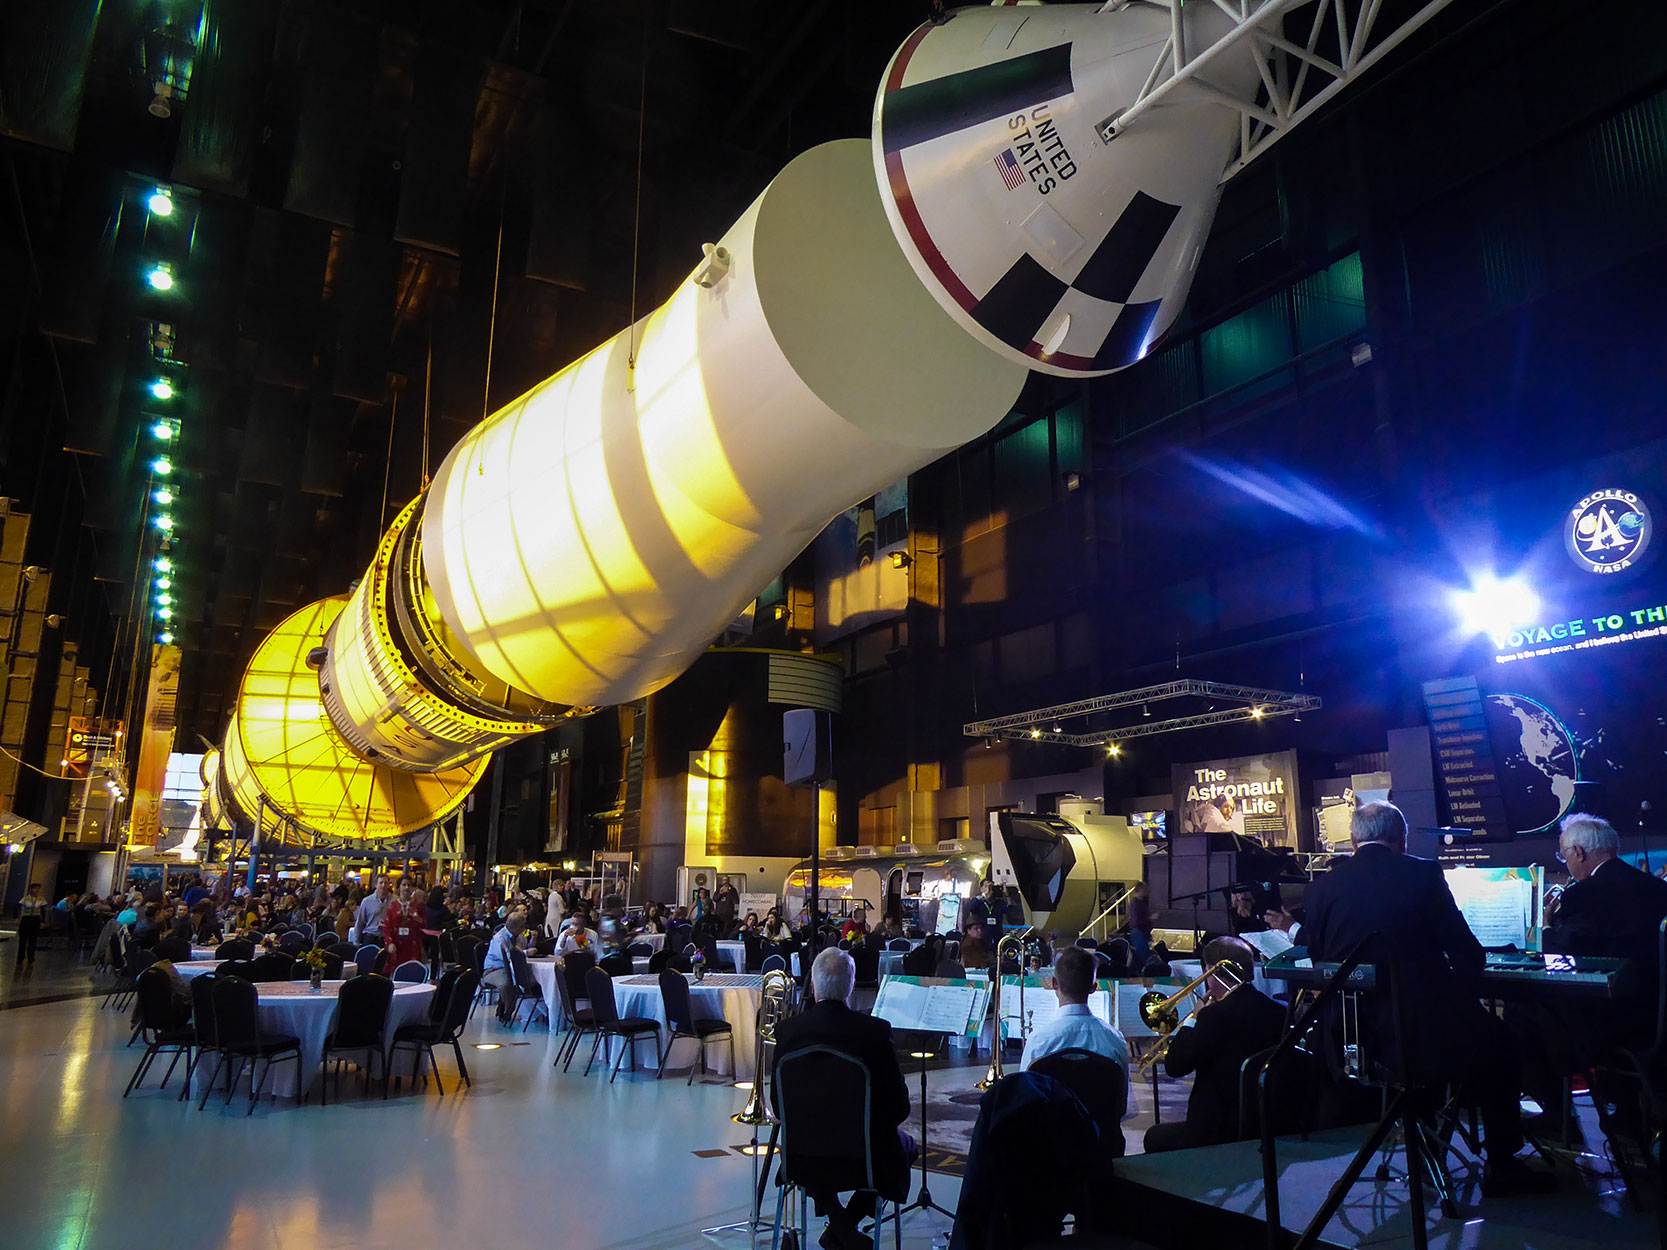 TBEX travel blogging conference -- partying under the Apollo rocket at the US Rocket Center in Huntsville, Alabama